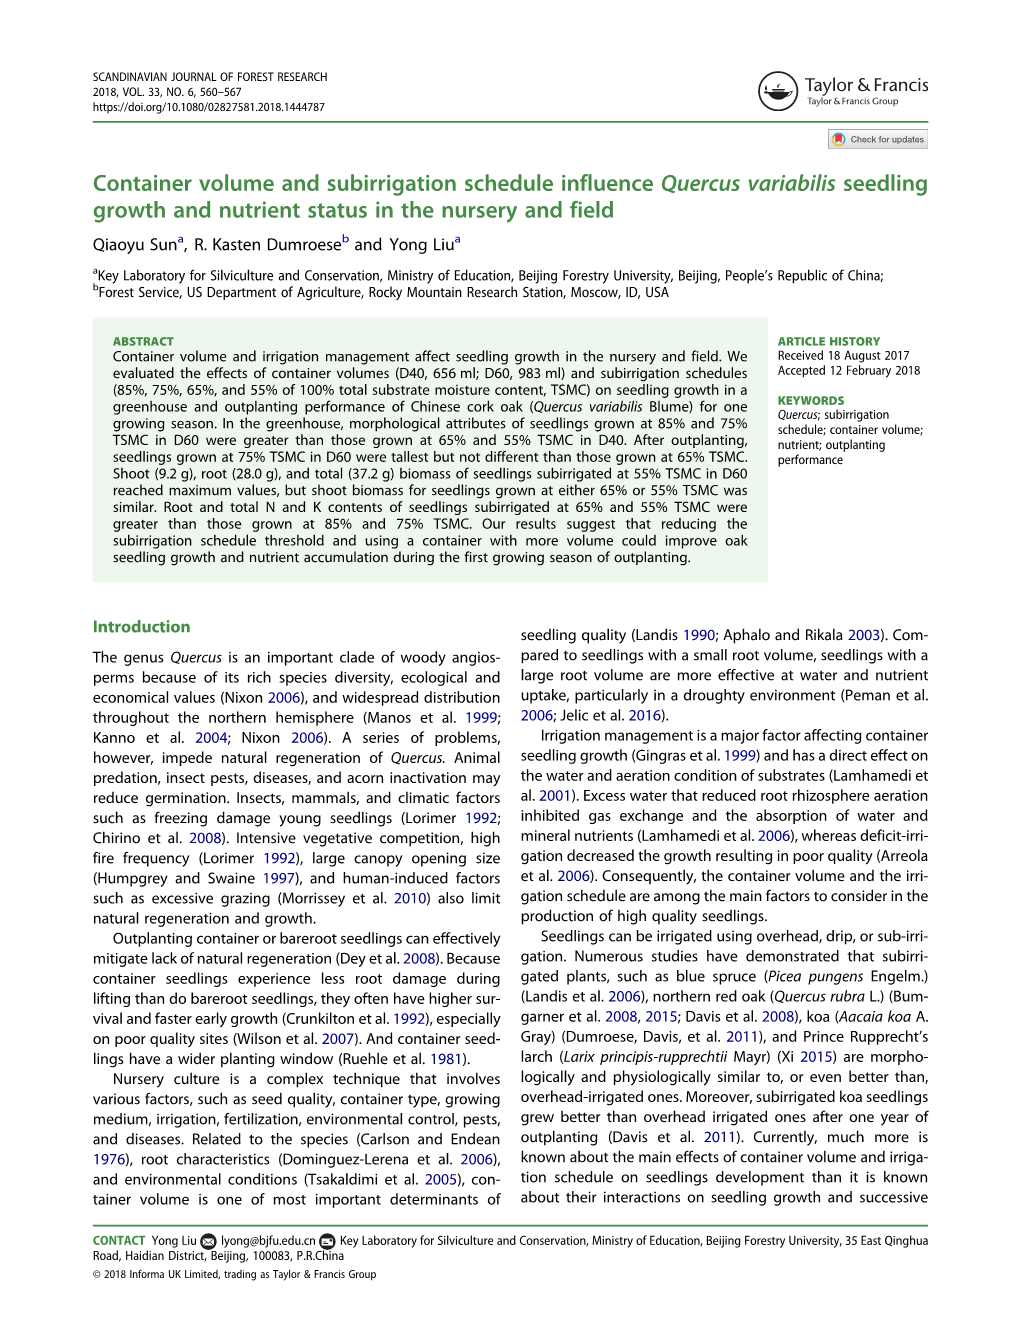 Container Volume and Subirrigation Schedule Influence Quercus Variabilis Seedling Growth and Nutrient Status in the Nursery and Field Qiaoyu Suna, R